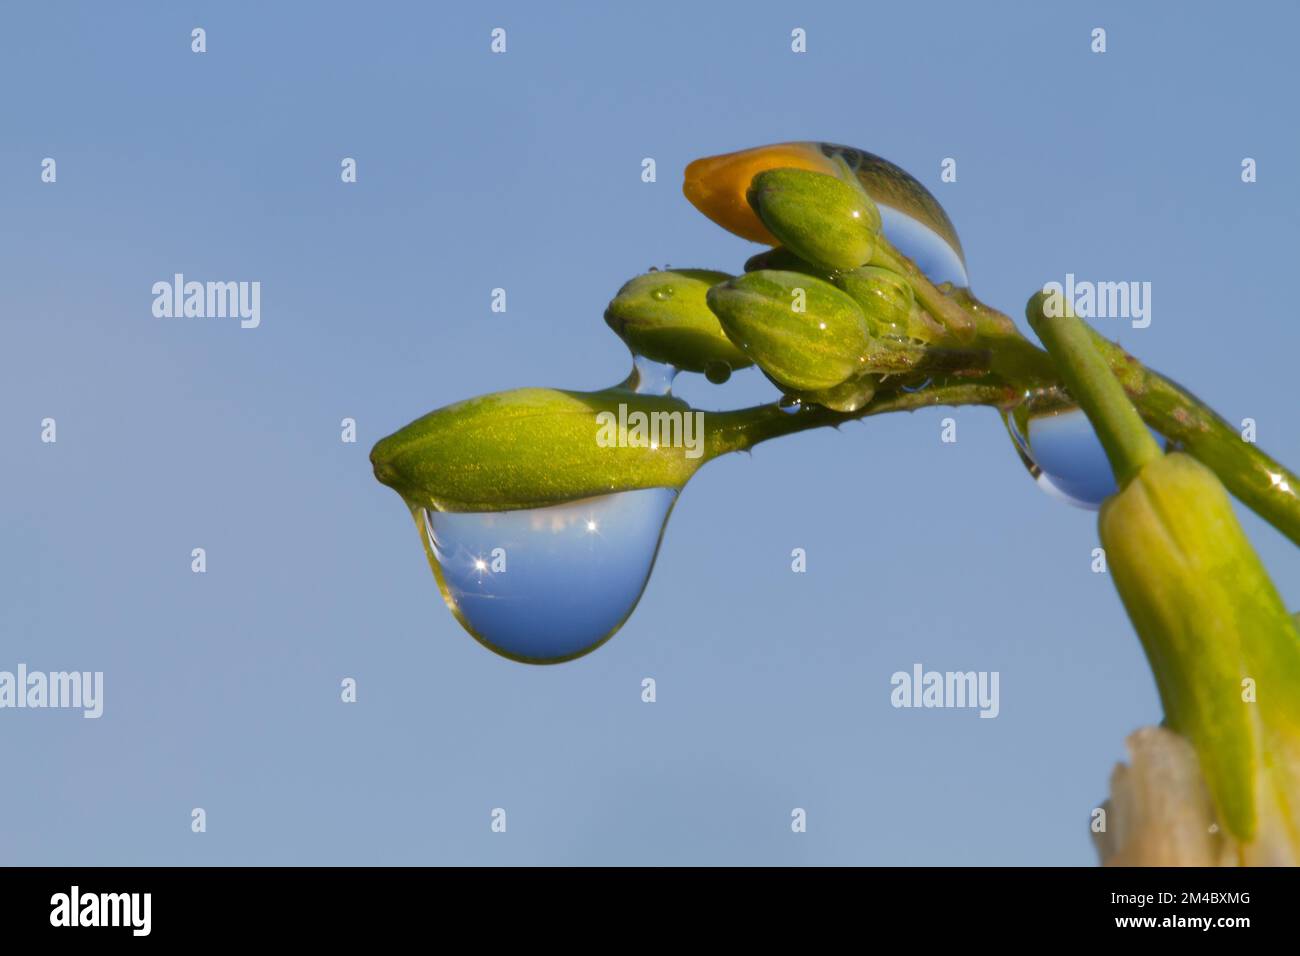 Closeup of waterdrops clinging to bud of Fodder radish under blue sky Stock Photo